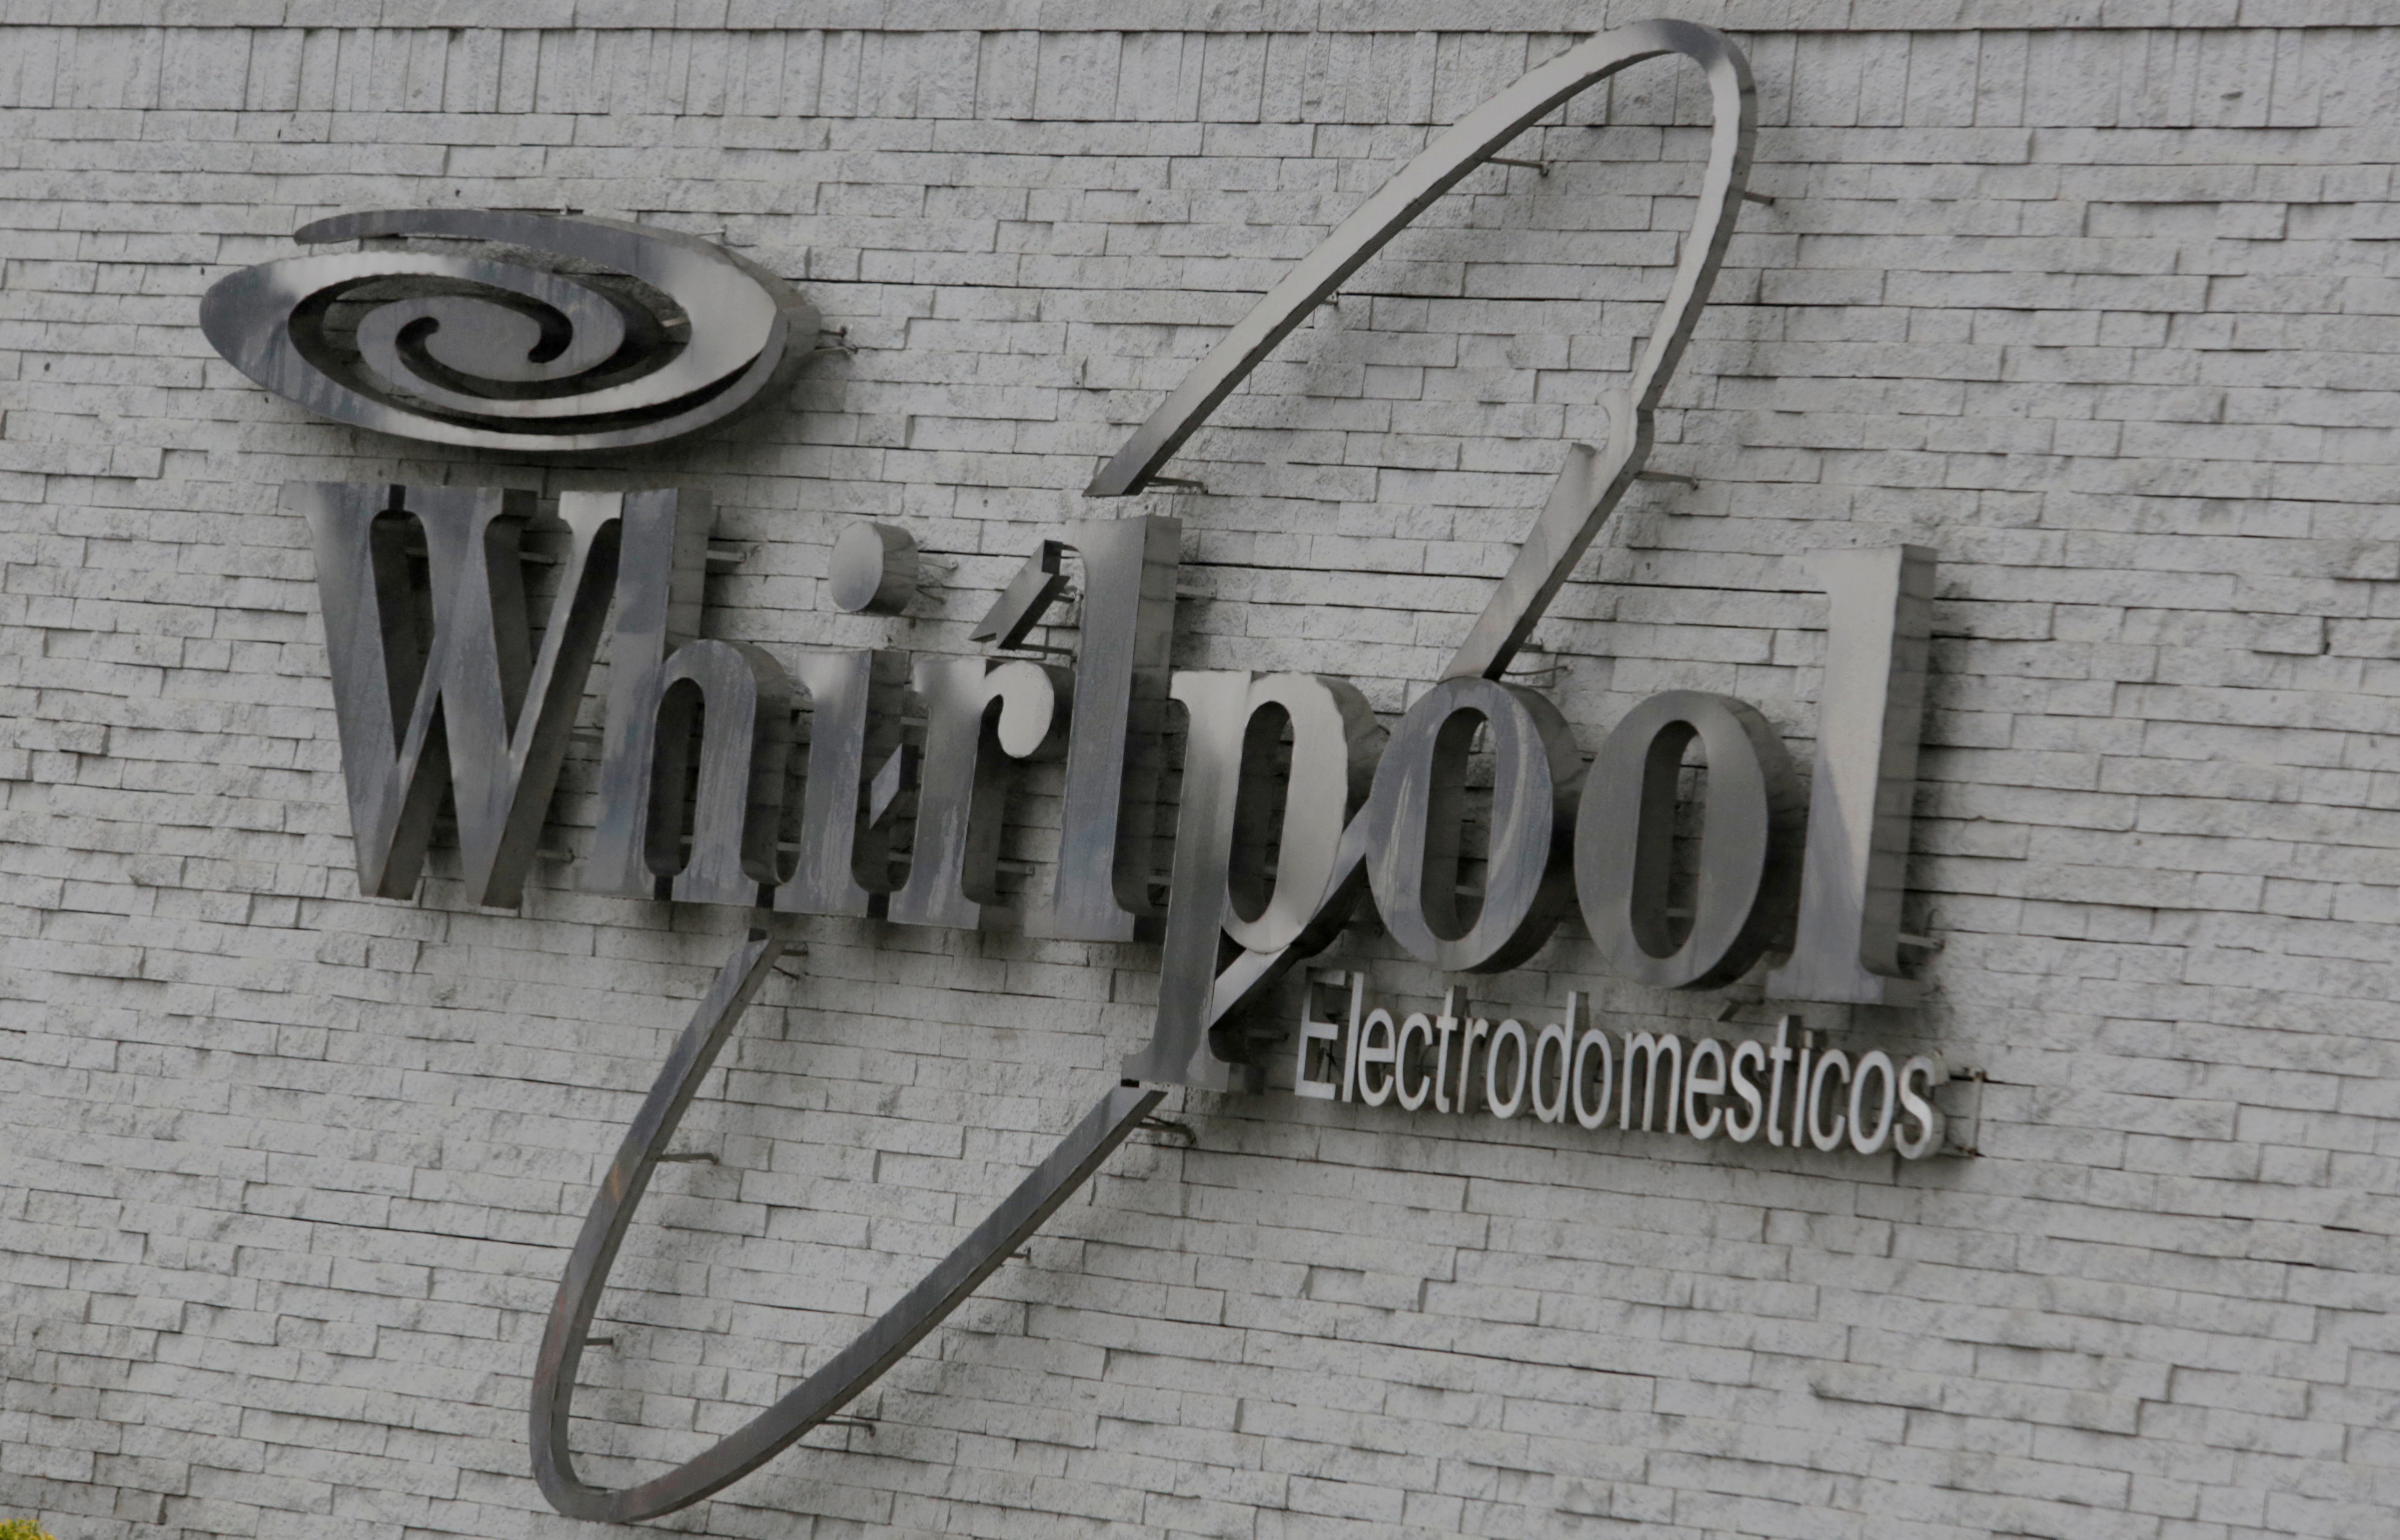 The Whirlpool logo is seen at their plant in Apodaca, Monterrey, Mexico